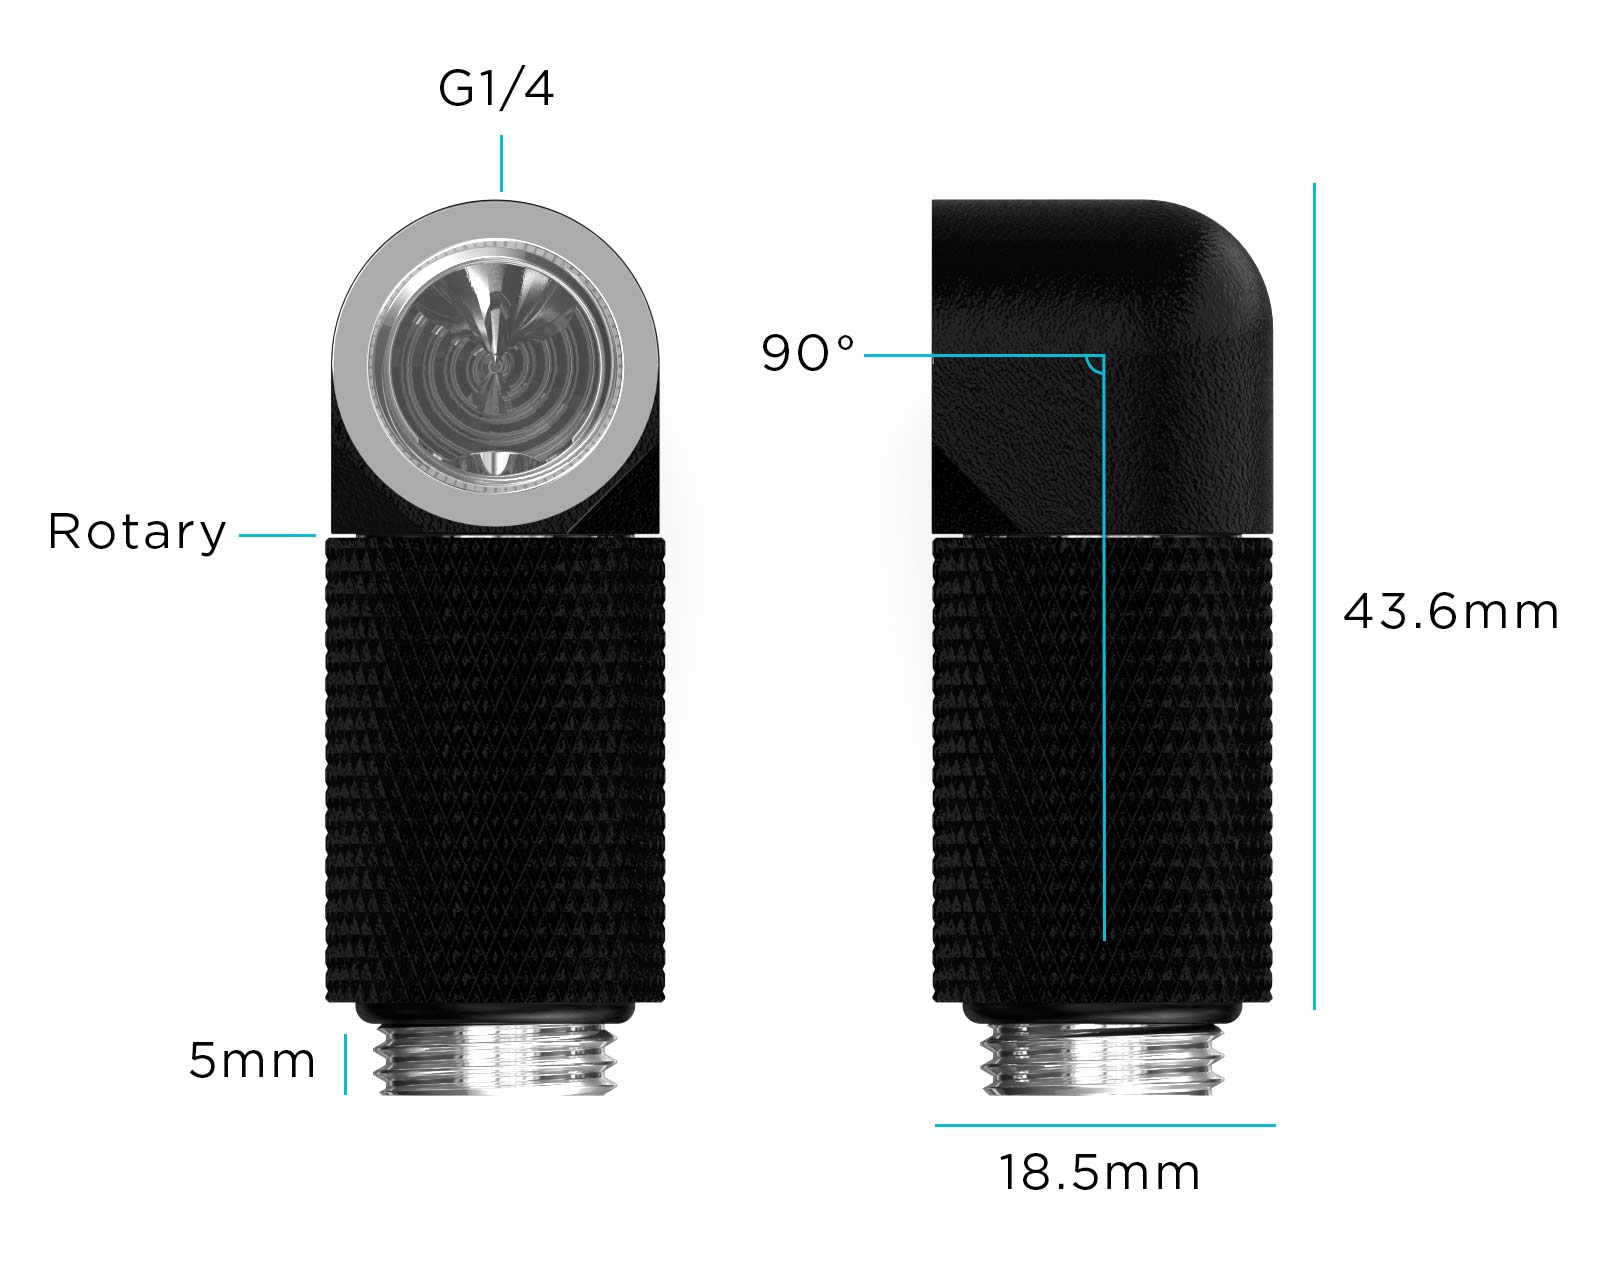 PrimoChill Male to Female G 1/4in. 90 Degree SX Rotary 25mm Extension Elbow Fitting - PrimoChill - KEEPING IT COOL